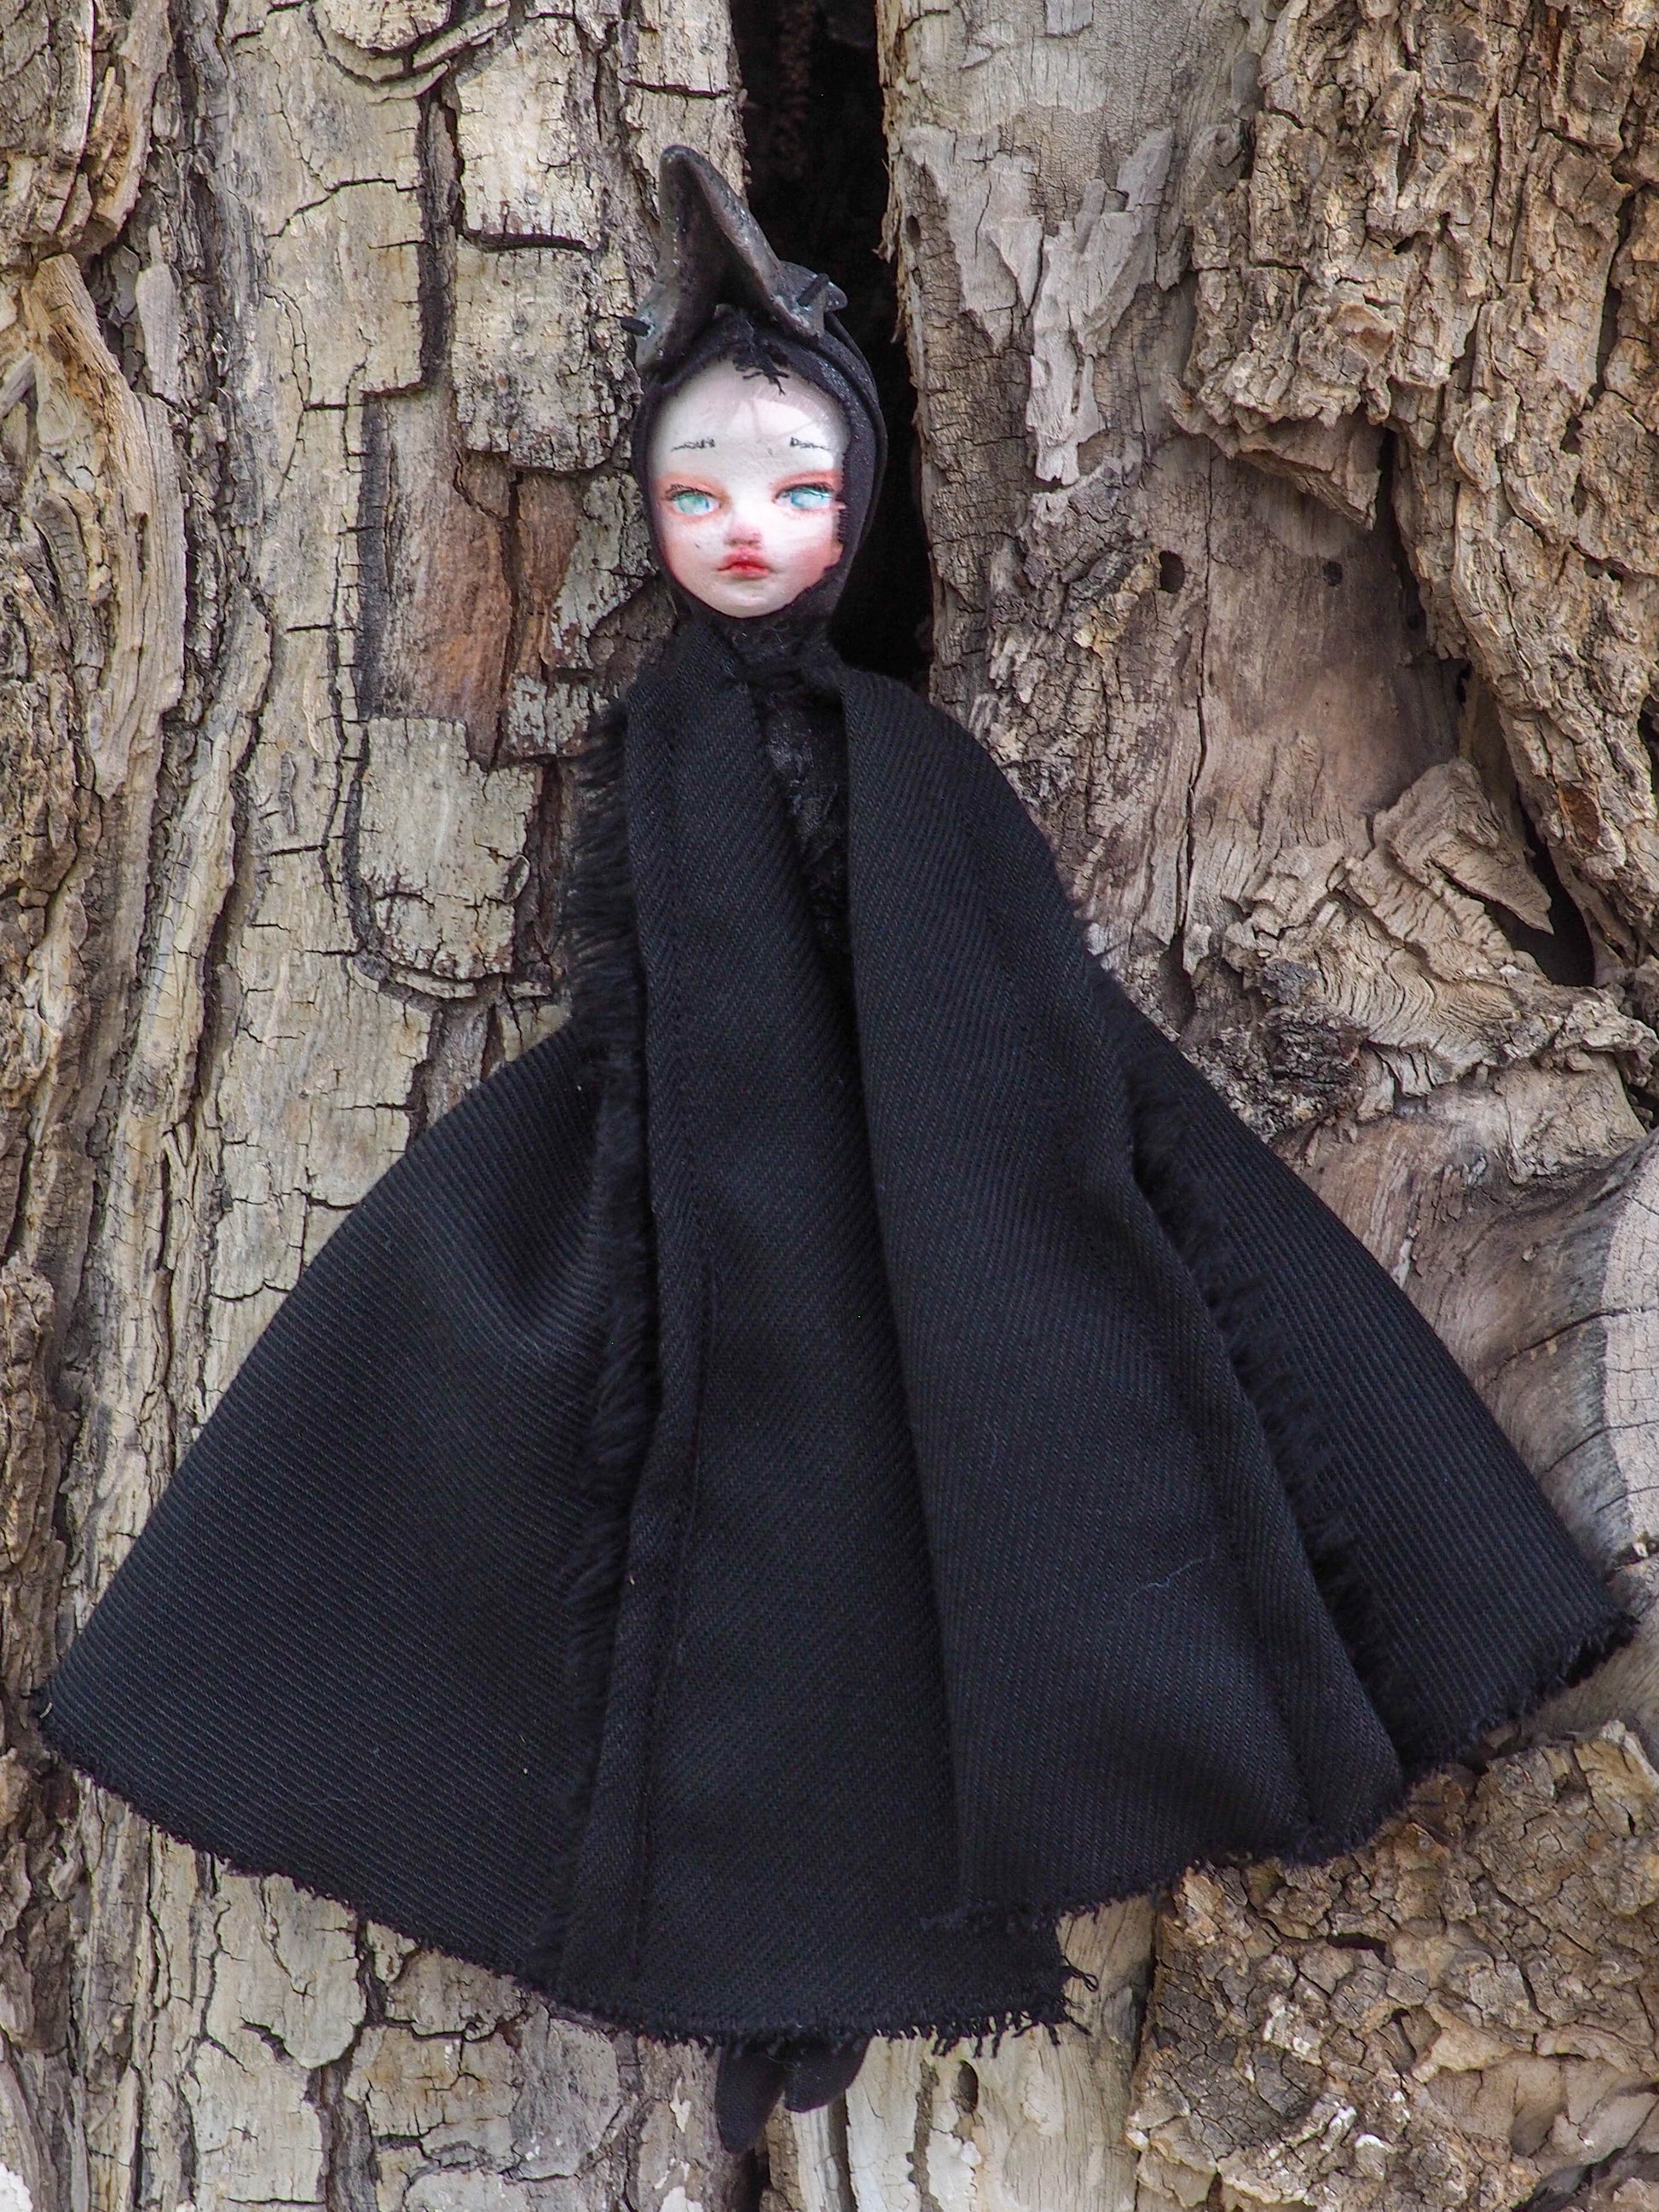 THE PLAGUE DOCTOR is a handmade Halloween art doll created by Danita Art. Using air dried clay, found fabrics and needle stitching for her body, Danita created an amazing original piece of work.